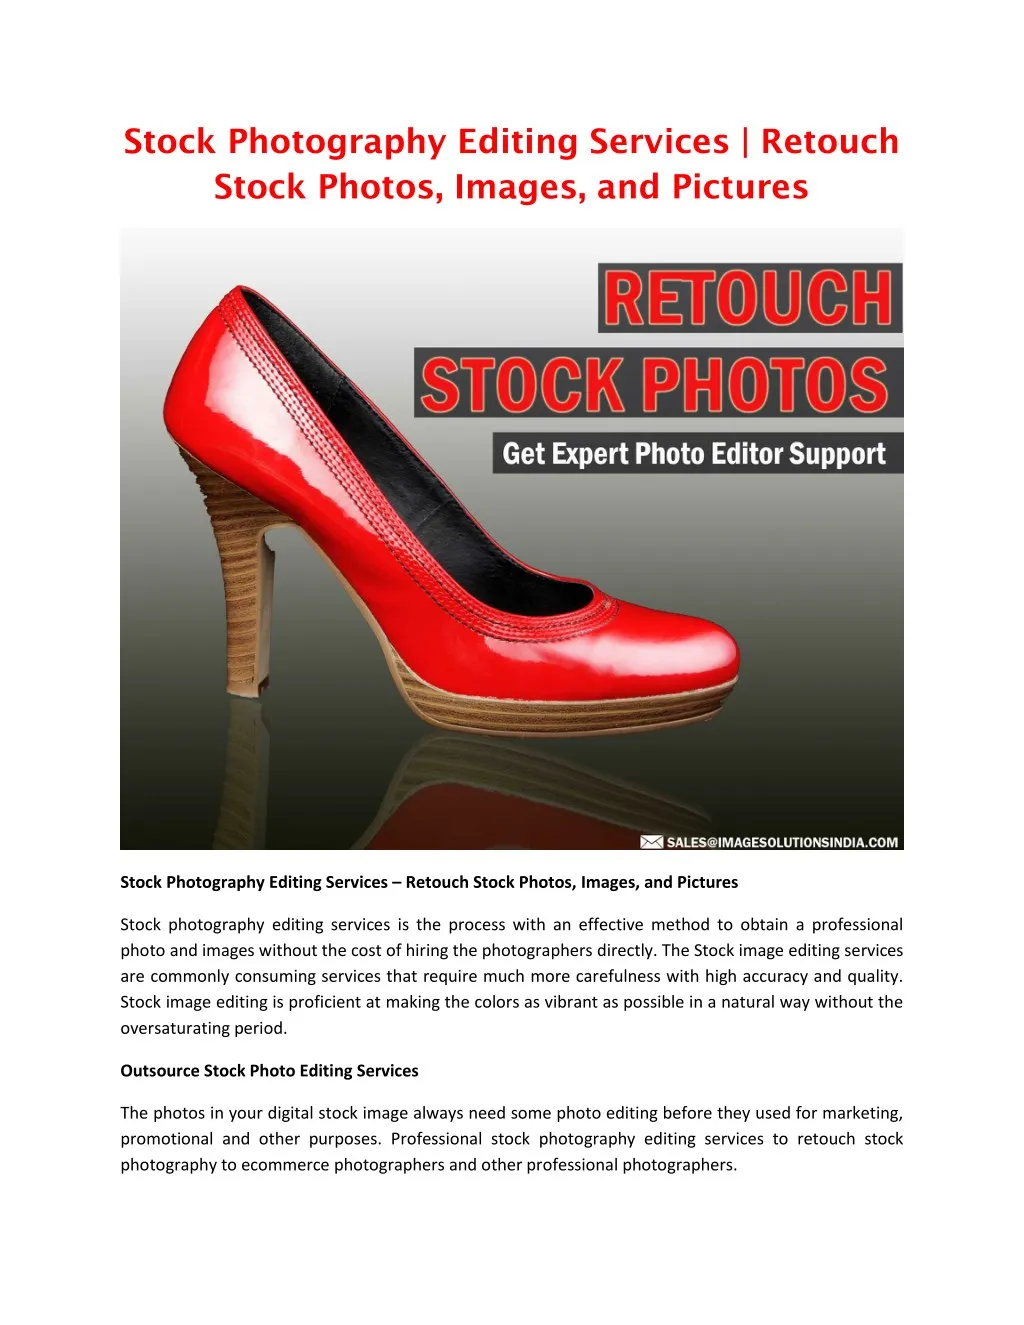 stock photography editing services retouch stock